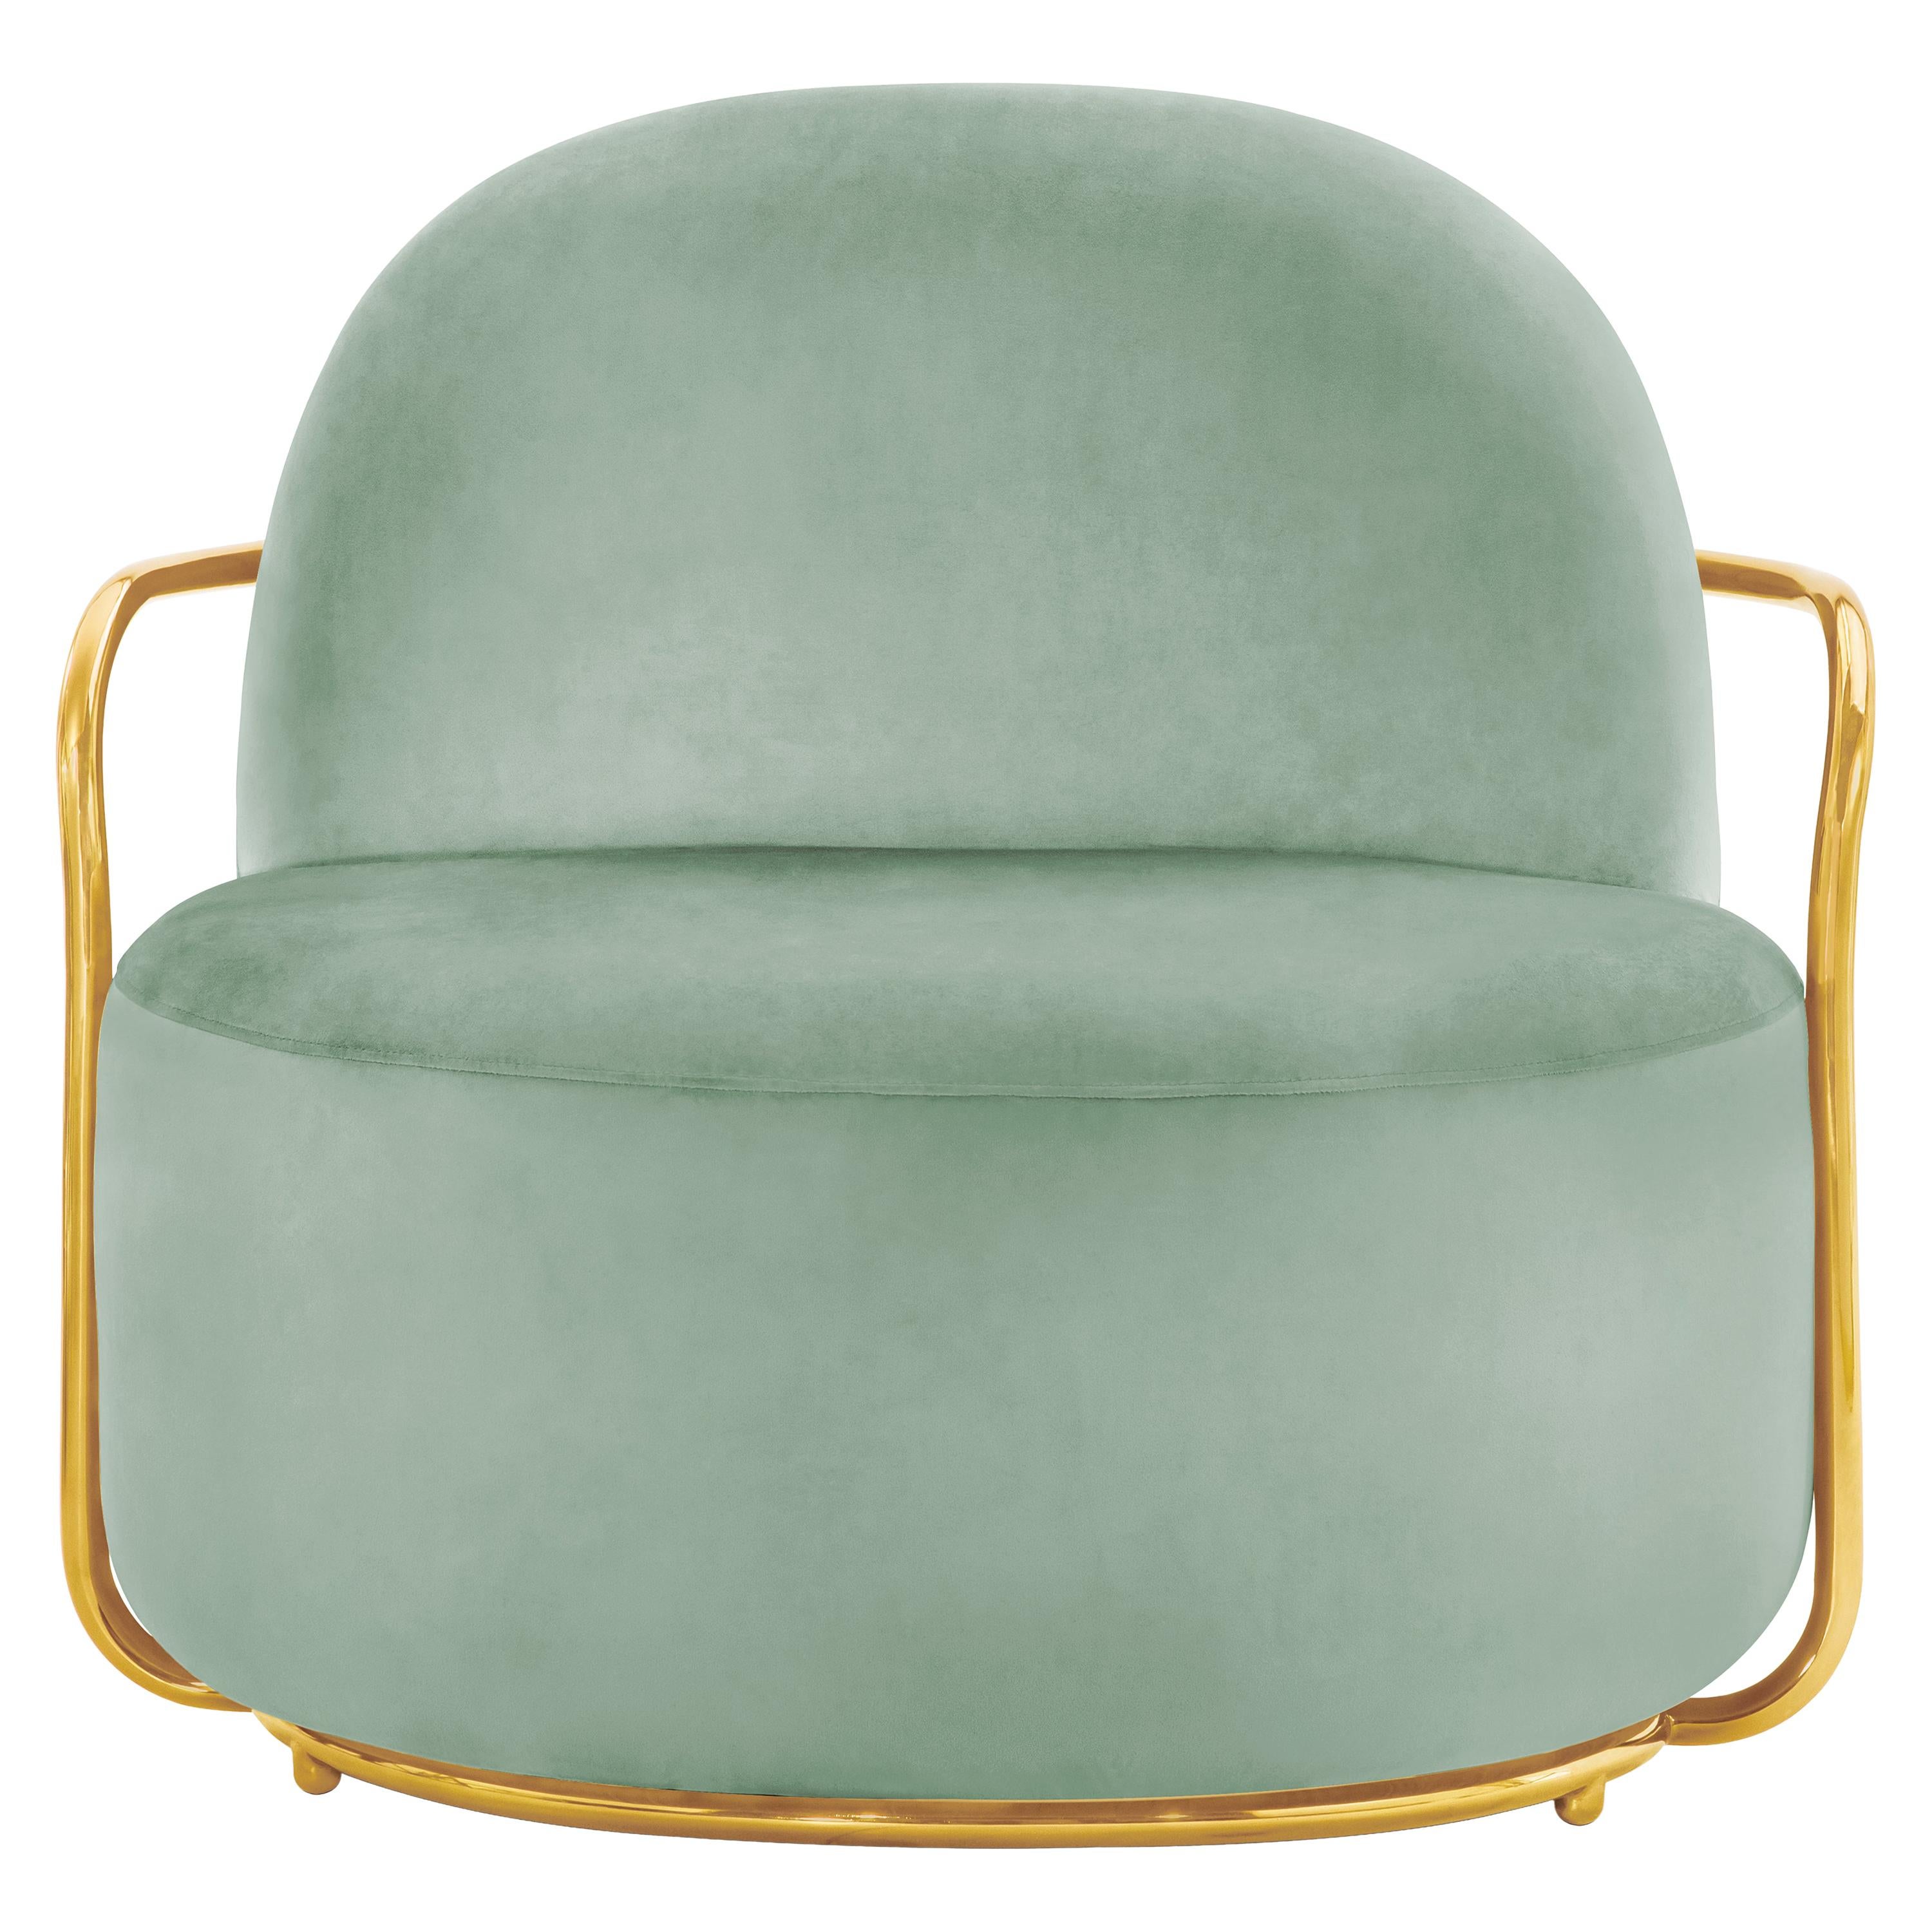 Orion Lounge Chair with Plush Mint Green Velvet and Gold Arms by Nika Zupanc